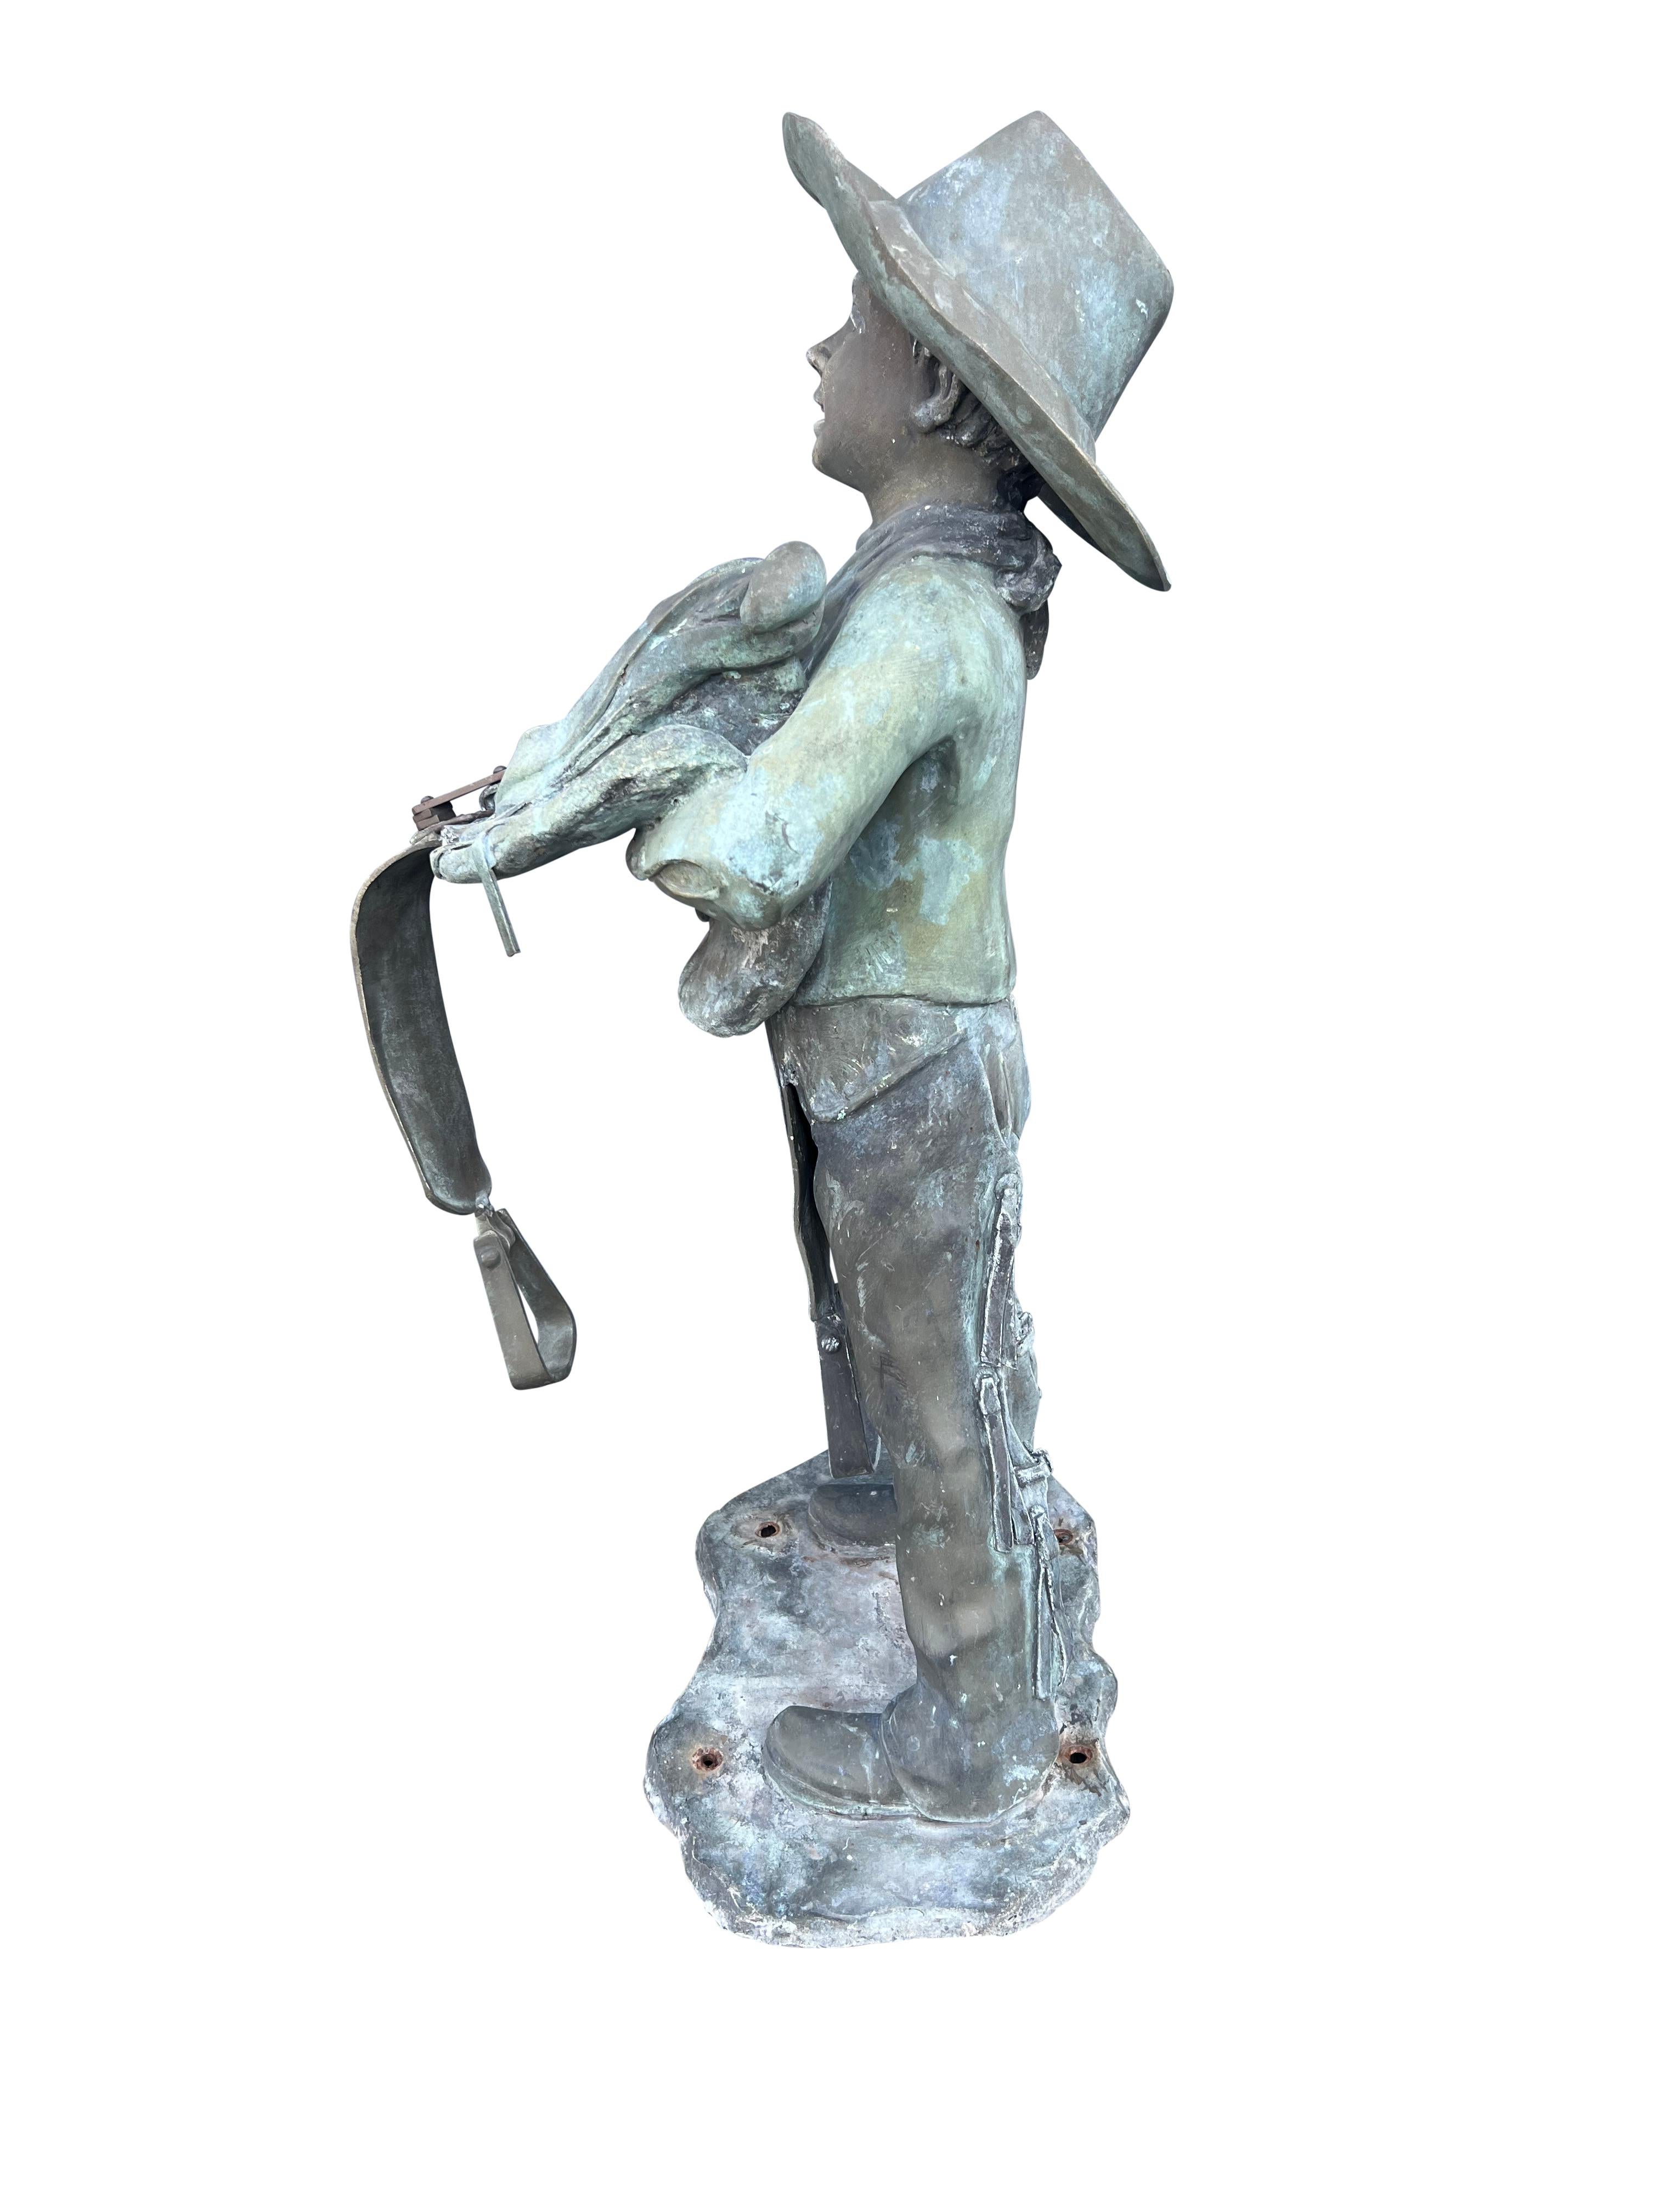 Boy with cowboy hat holding a saddle wearing chaps. This has been outdoors and has a verdigris patina.